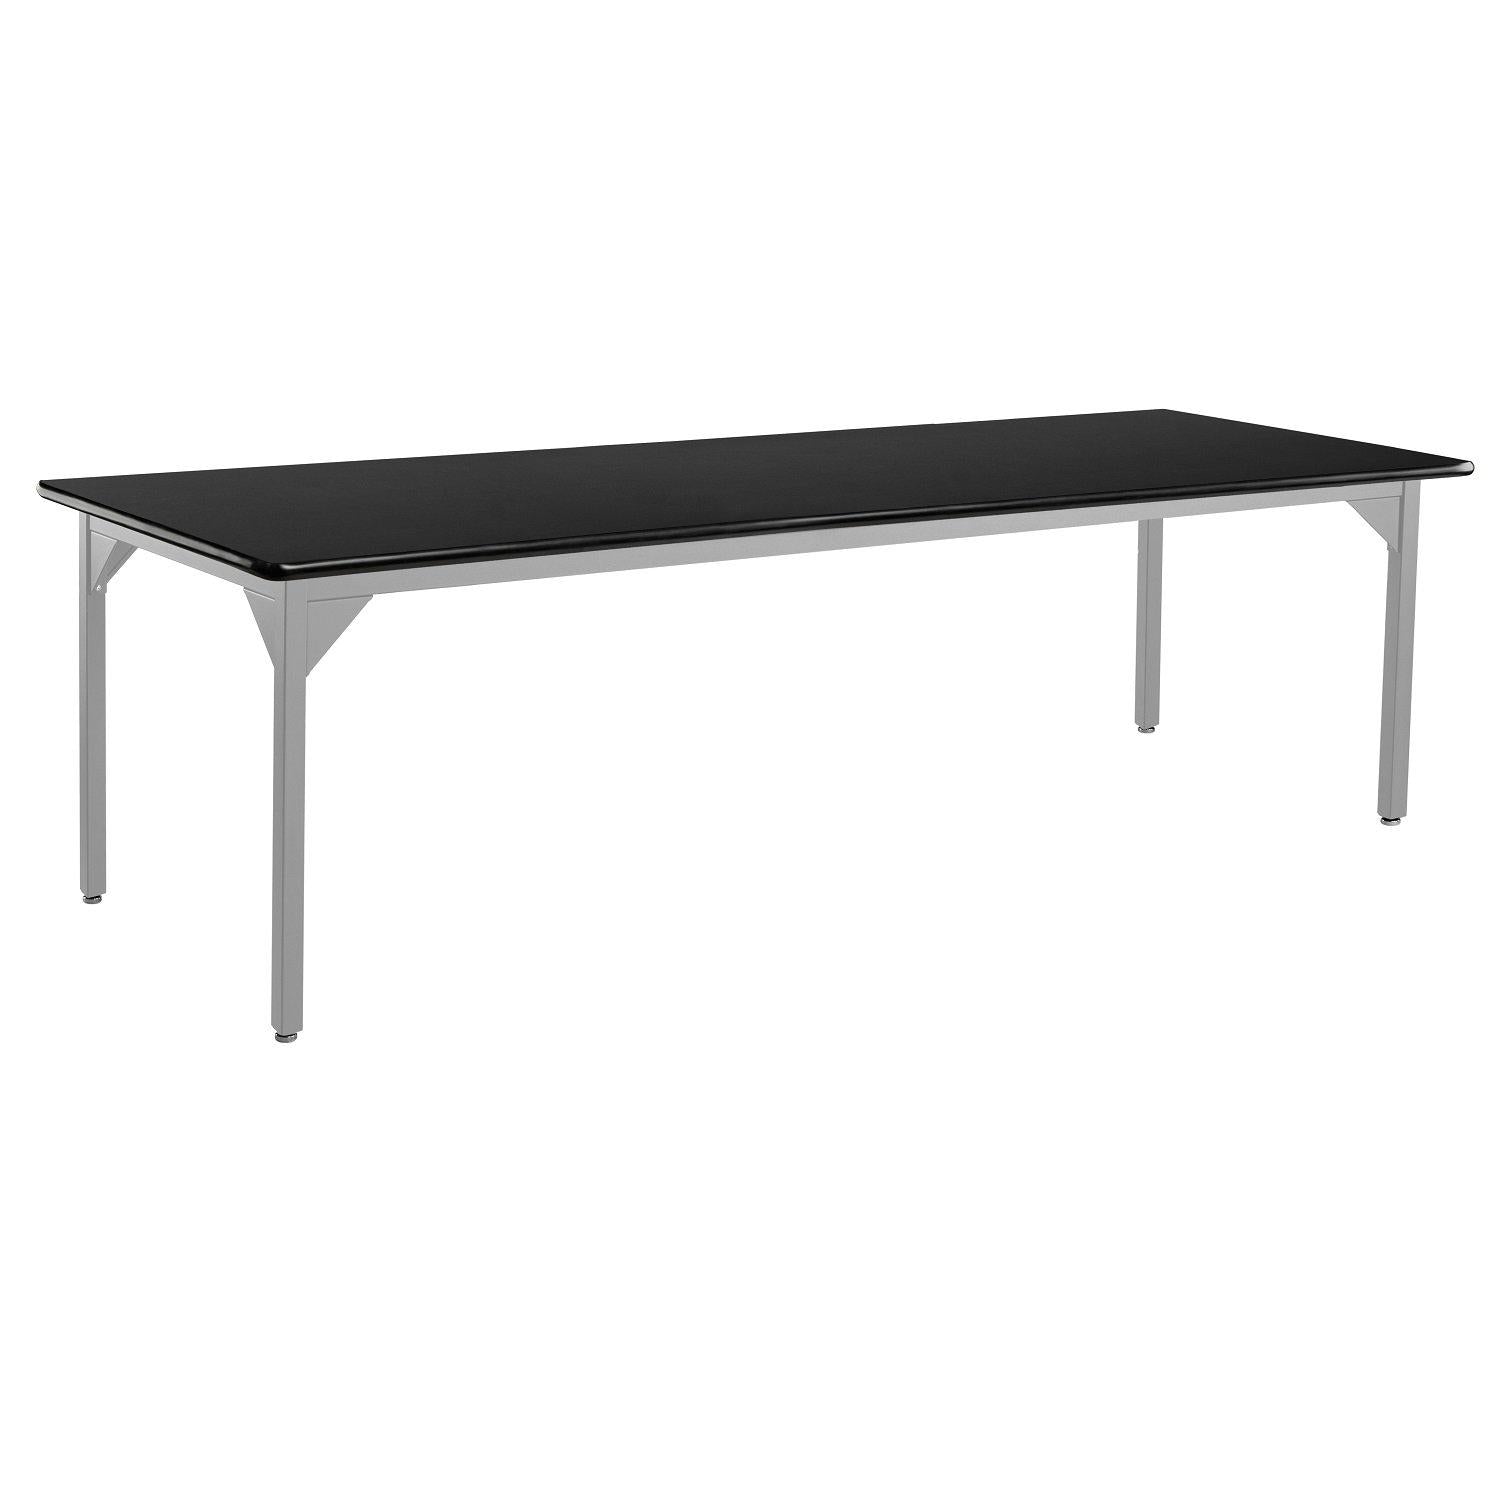 Heavy-Duty Fixed Height Utility Table, Soft Grey Frame, 42" x 72", High-Pressure Laminate Top with T-Mold Edge